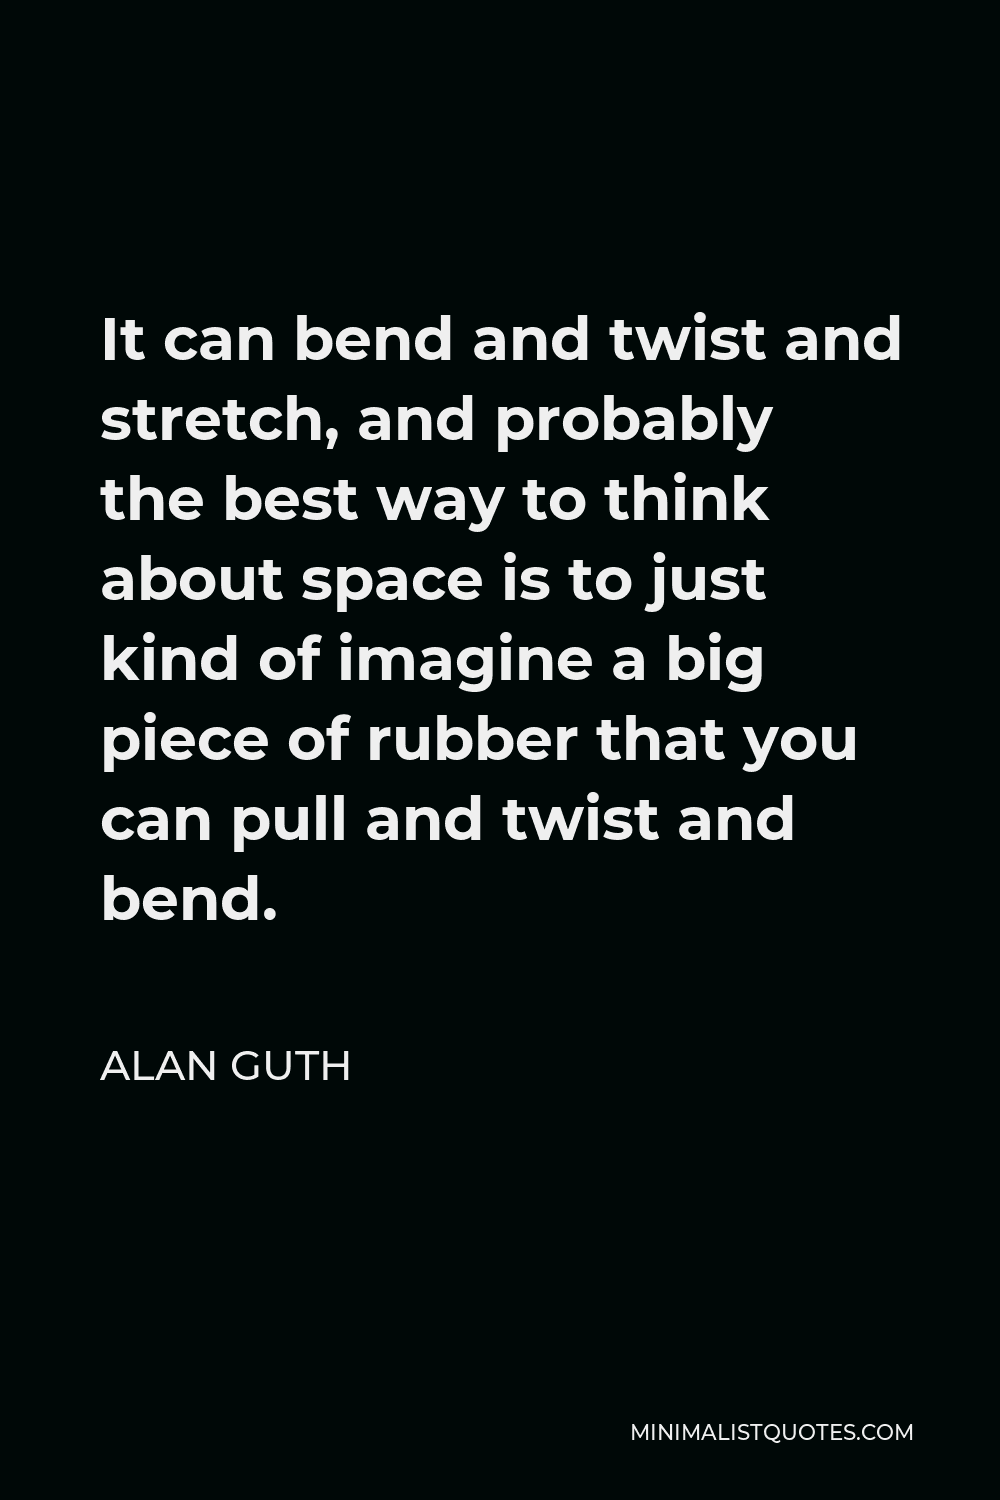 Alan Guth Quote - It can bend and twist and stretch, and probably the best way to think about space is to just kind of imagine a big piece of rubber that you can pull and twist and bend.